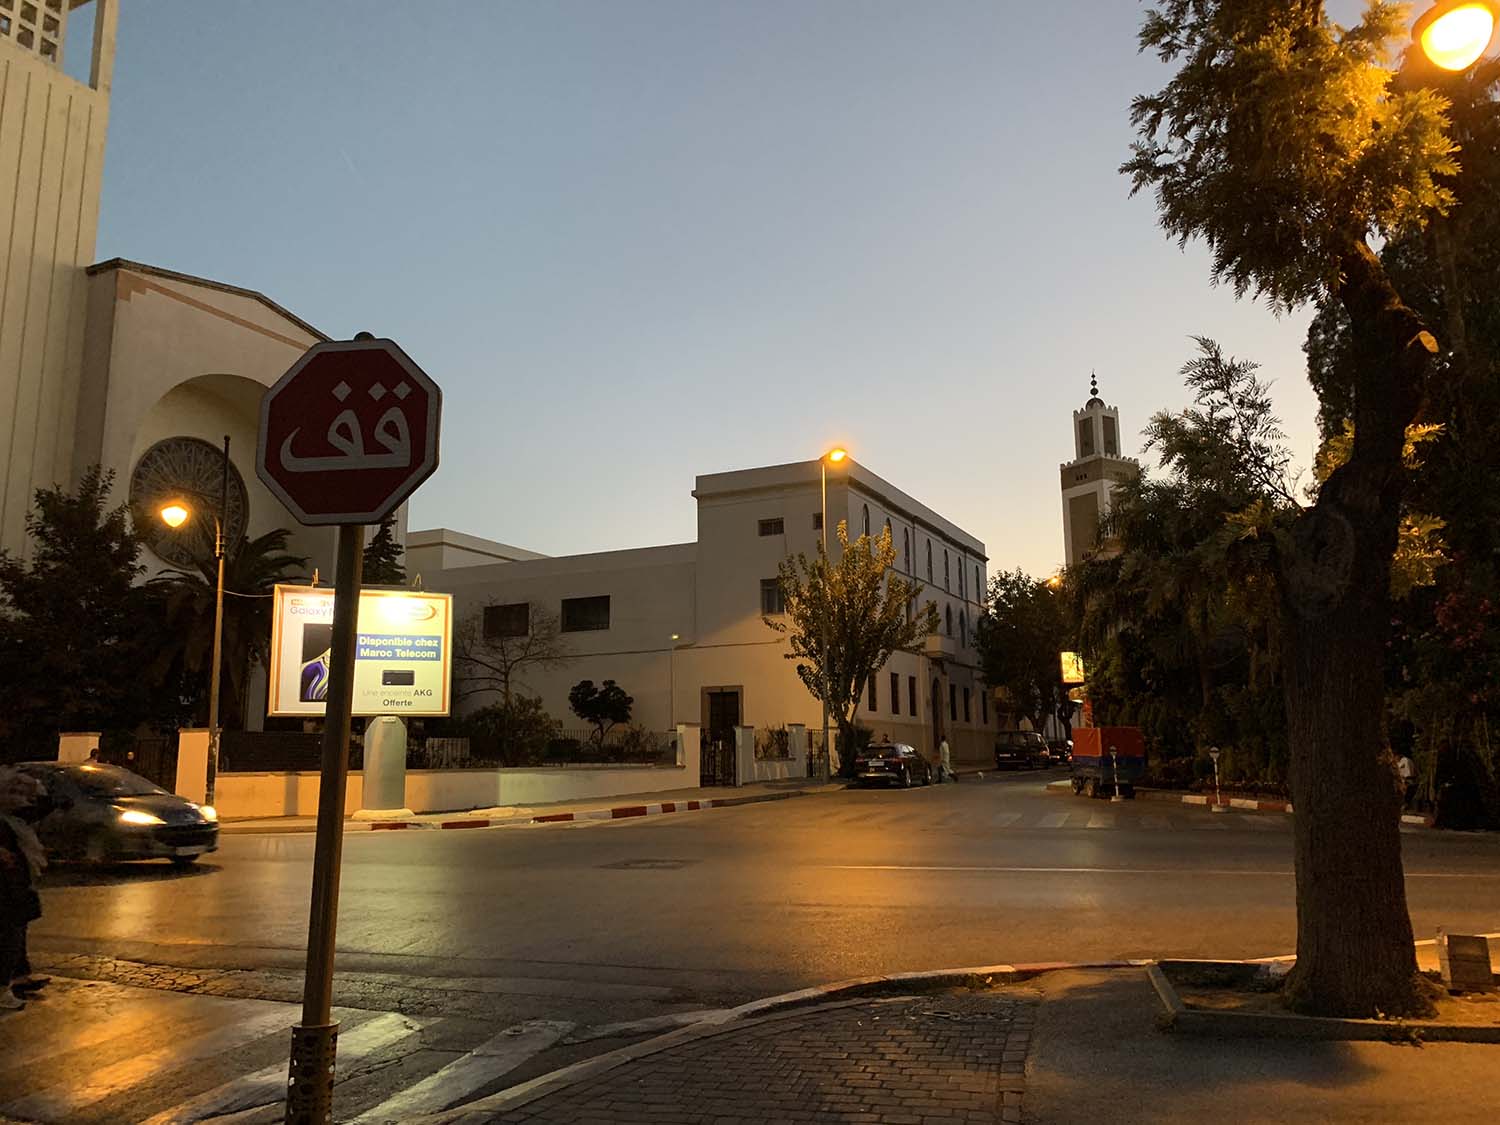 View of street in front of cathedral, past the convent toward Mohammed V Mosque in the distance